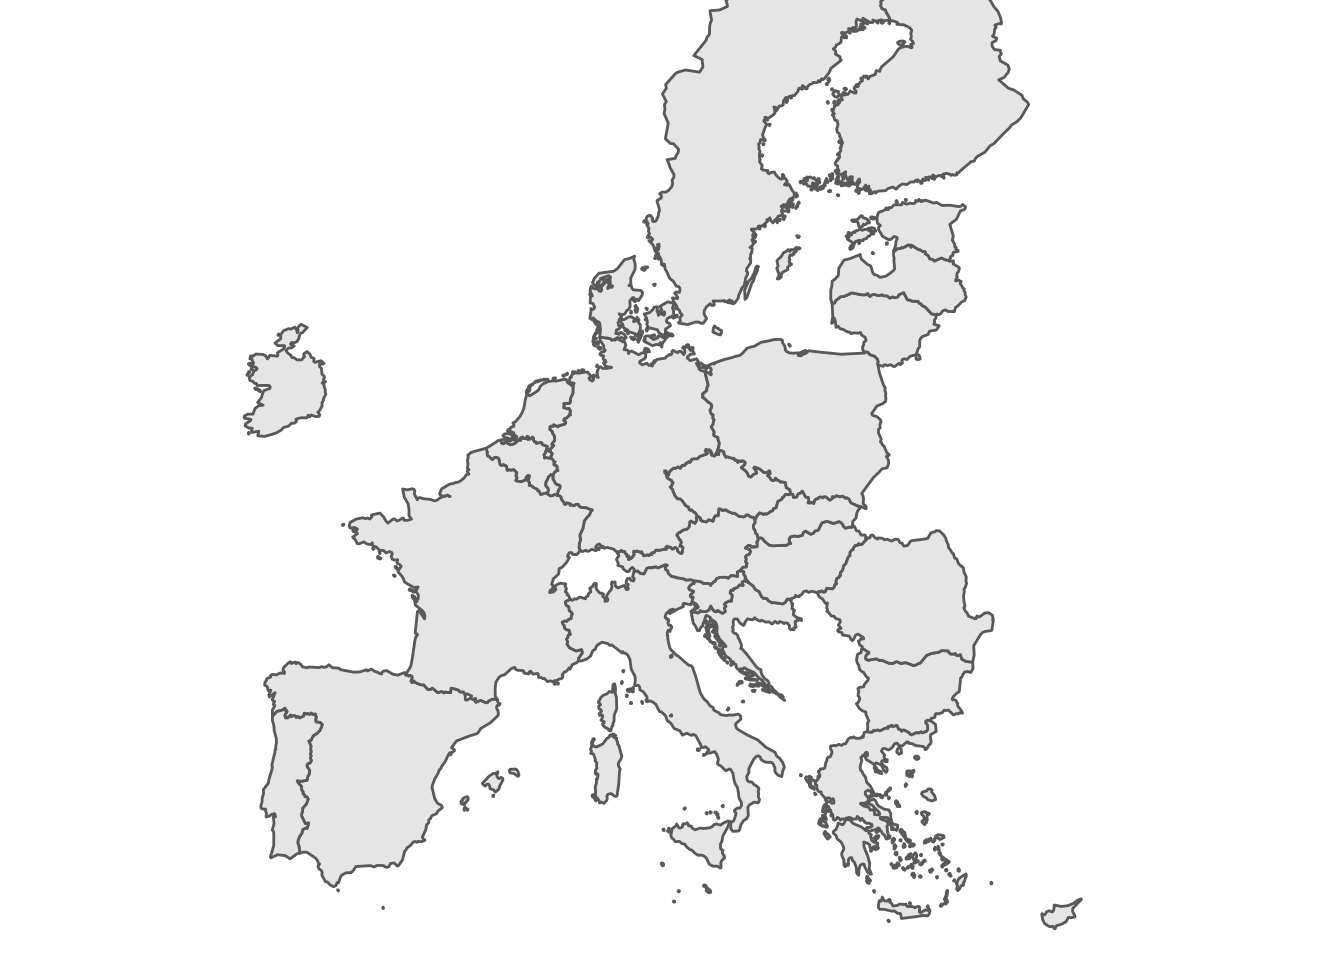 4 Drawing maps of Europe Using Eurostat with R